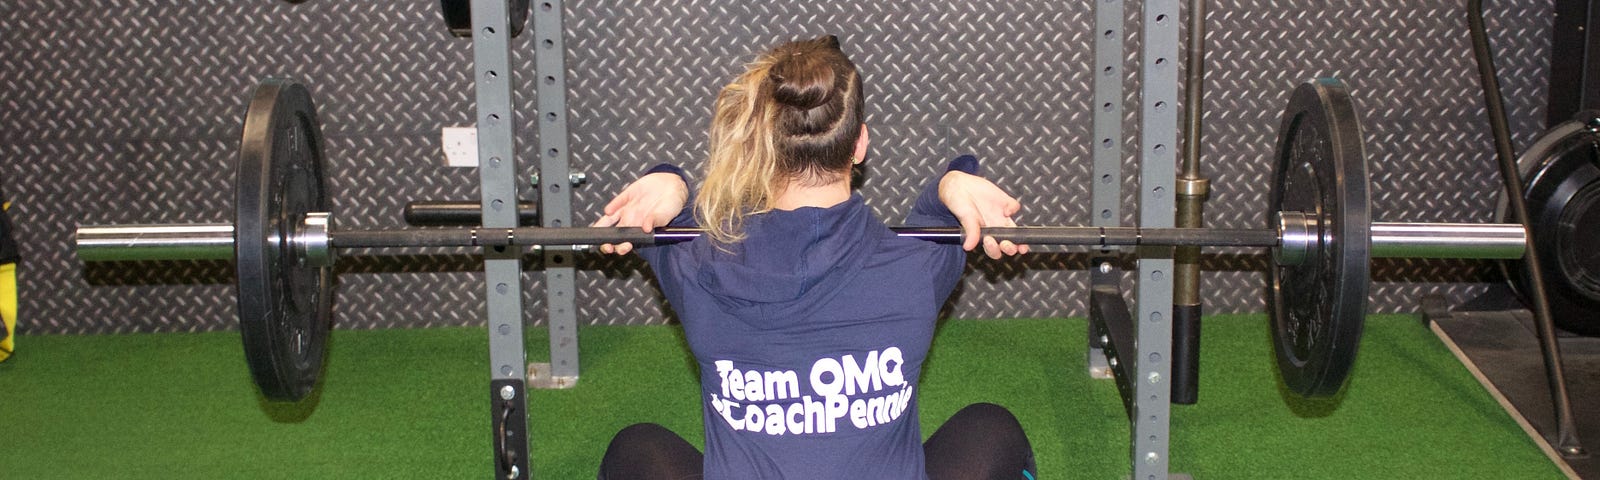 Photo shows Pennie Varvarides, author of the article and strength coach, performing a barbell front squat. Pennie is wearing pink crossfit nanos, black leggings and a blue top which reads “Coach Pennie”.